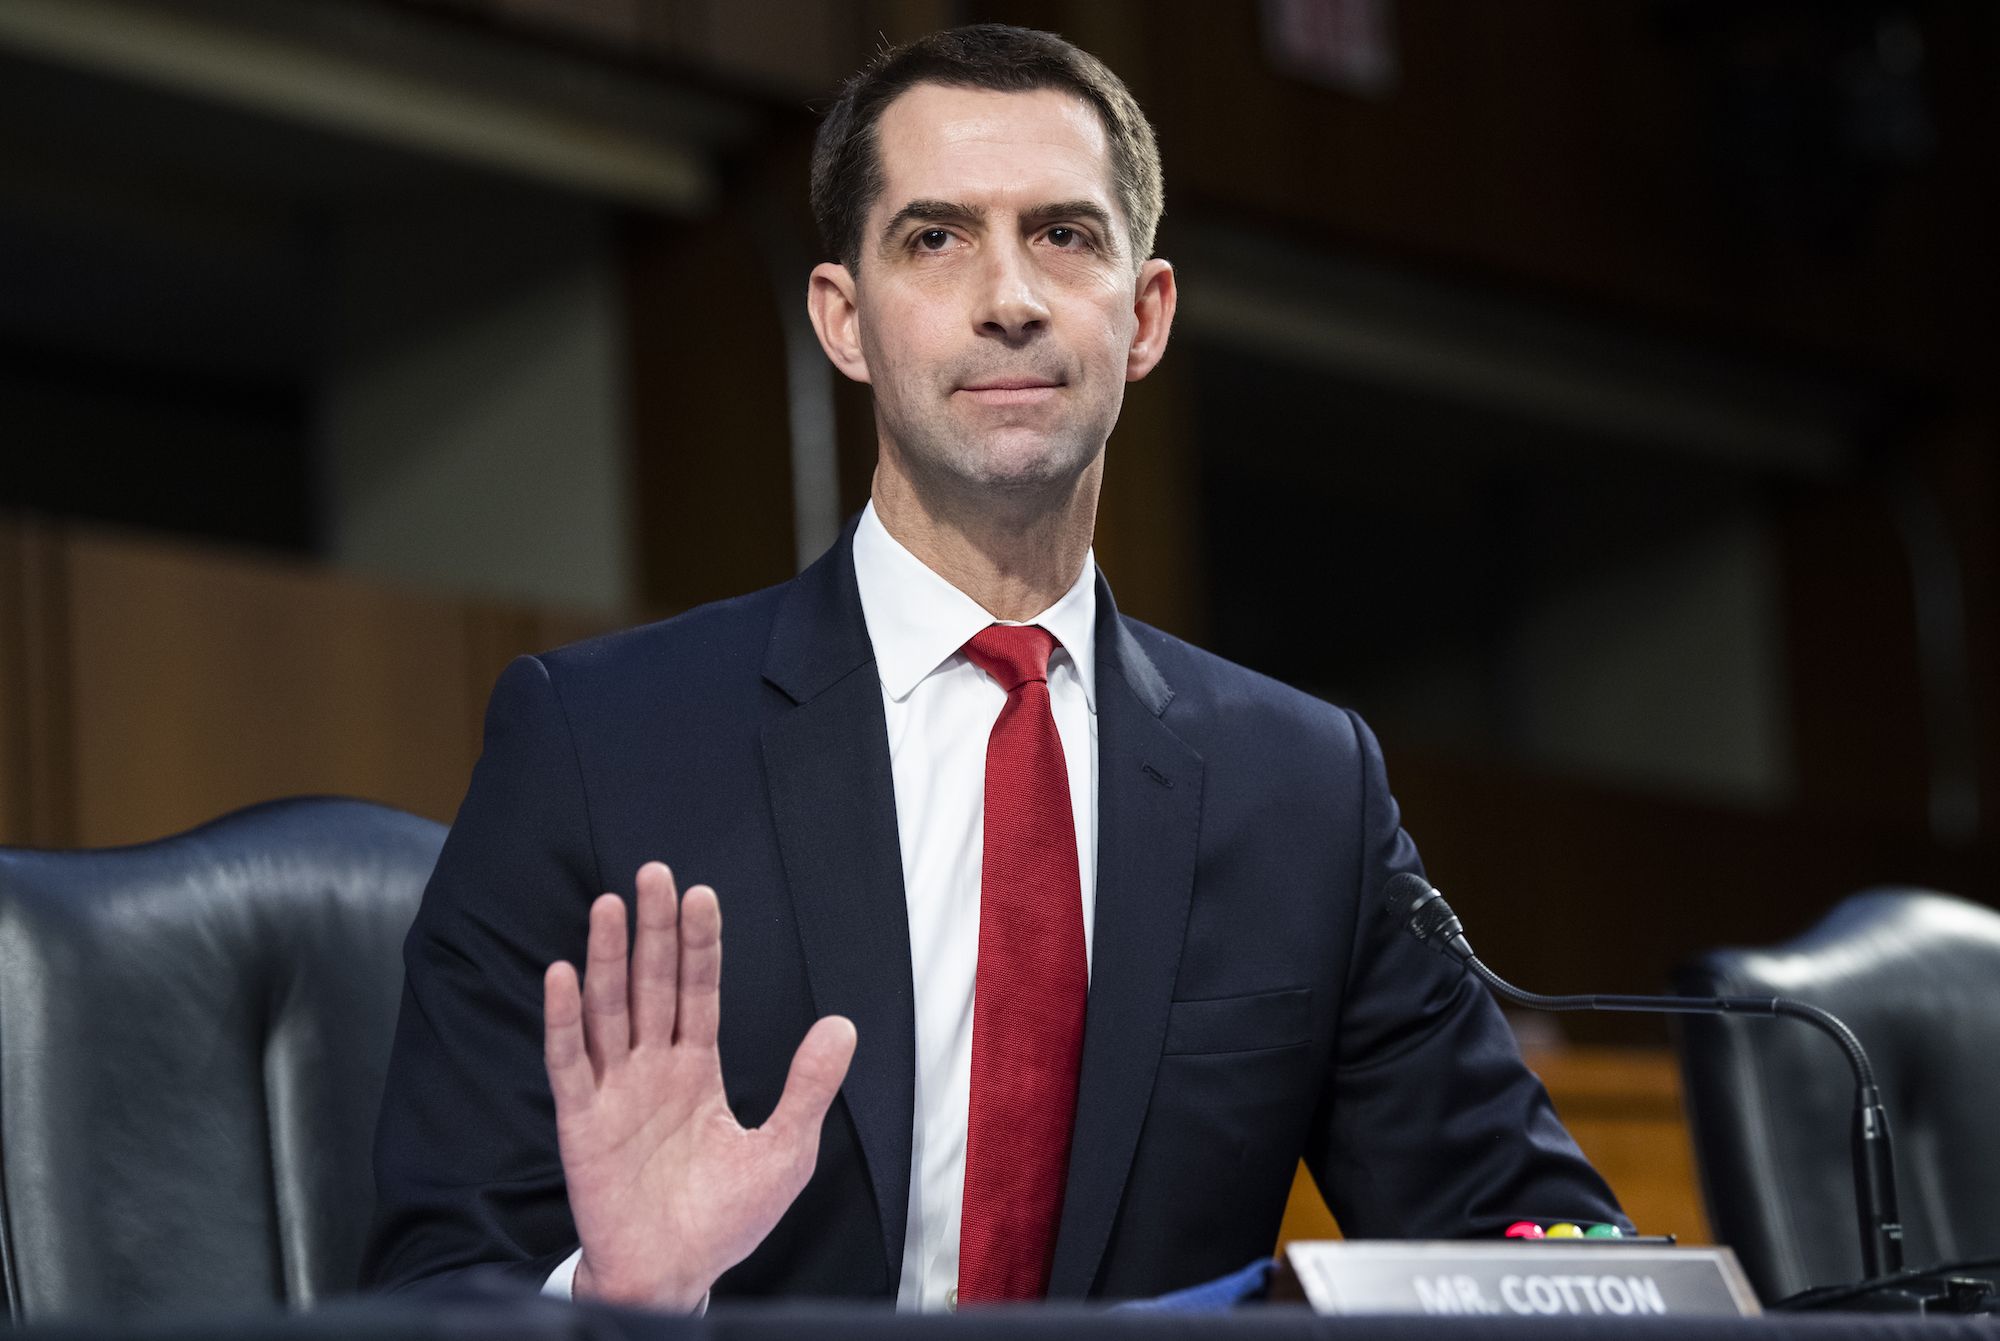 united states   march 09 sen tom cotton, r ark, asks a question during the senate judiciary committee confirmation hearing for lisa monaco, nominee for deputy attorney general, and vanita gupta, nominee for associate attorney general, in hart building on tuesday, march 9, 2021 photo by tom williamscq roll call